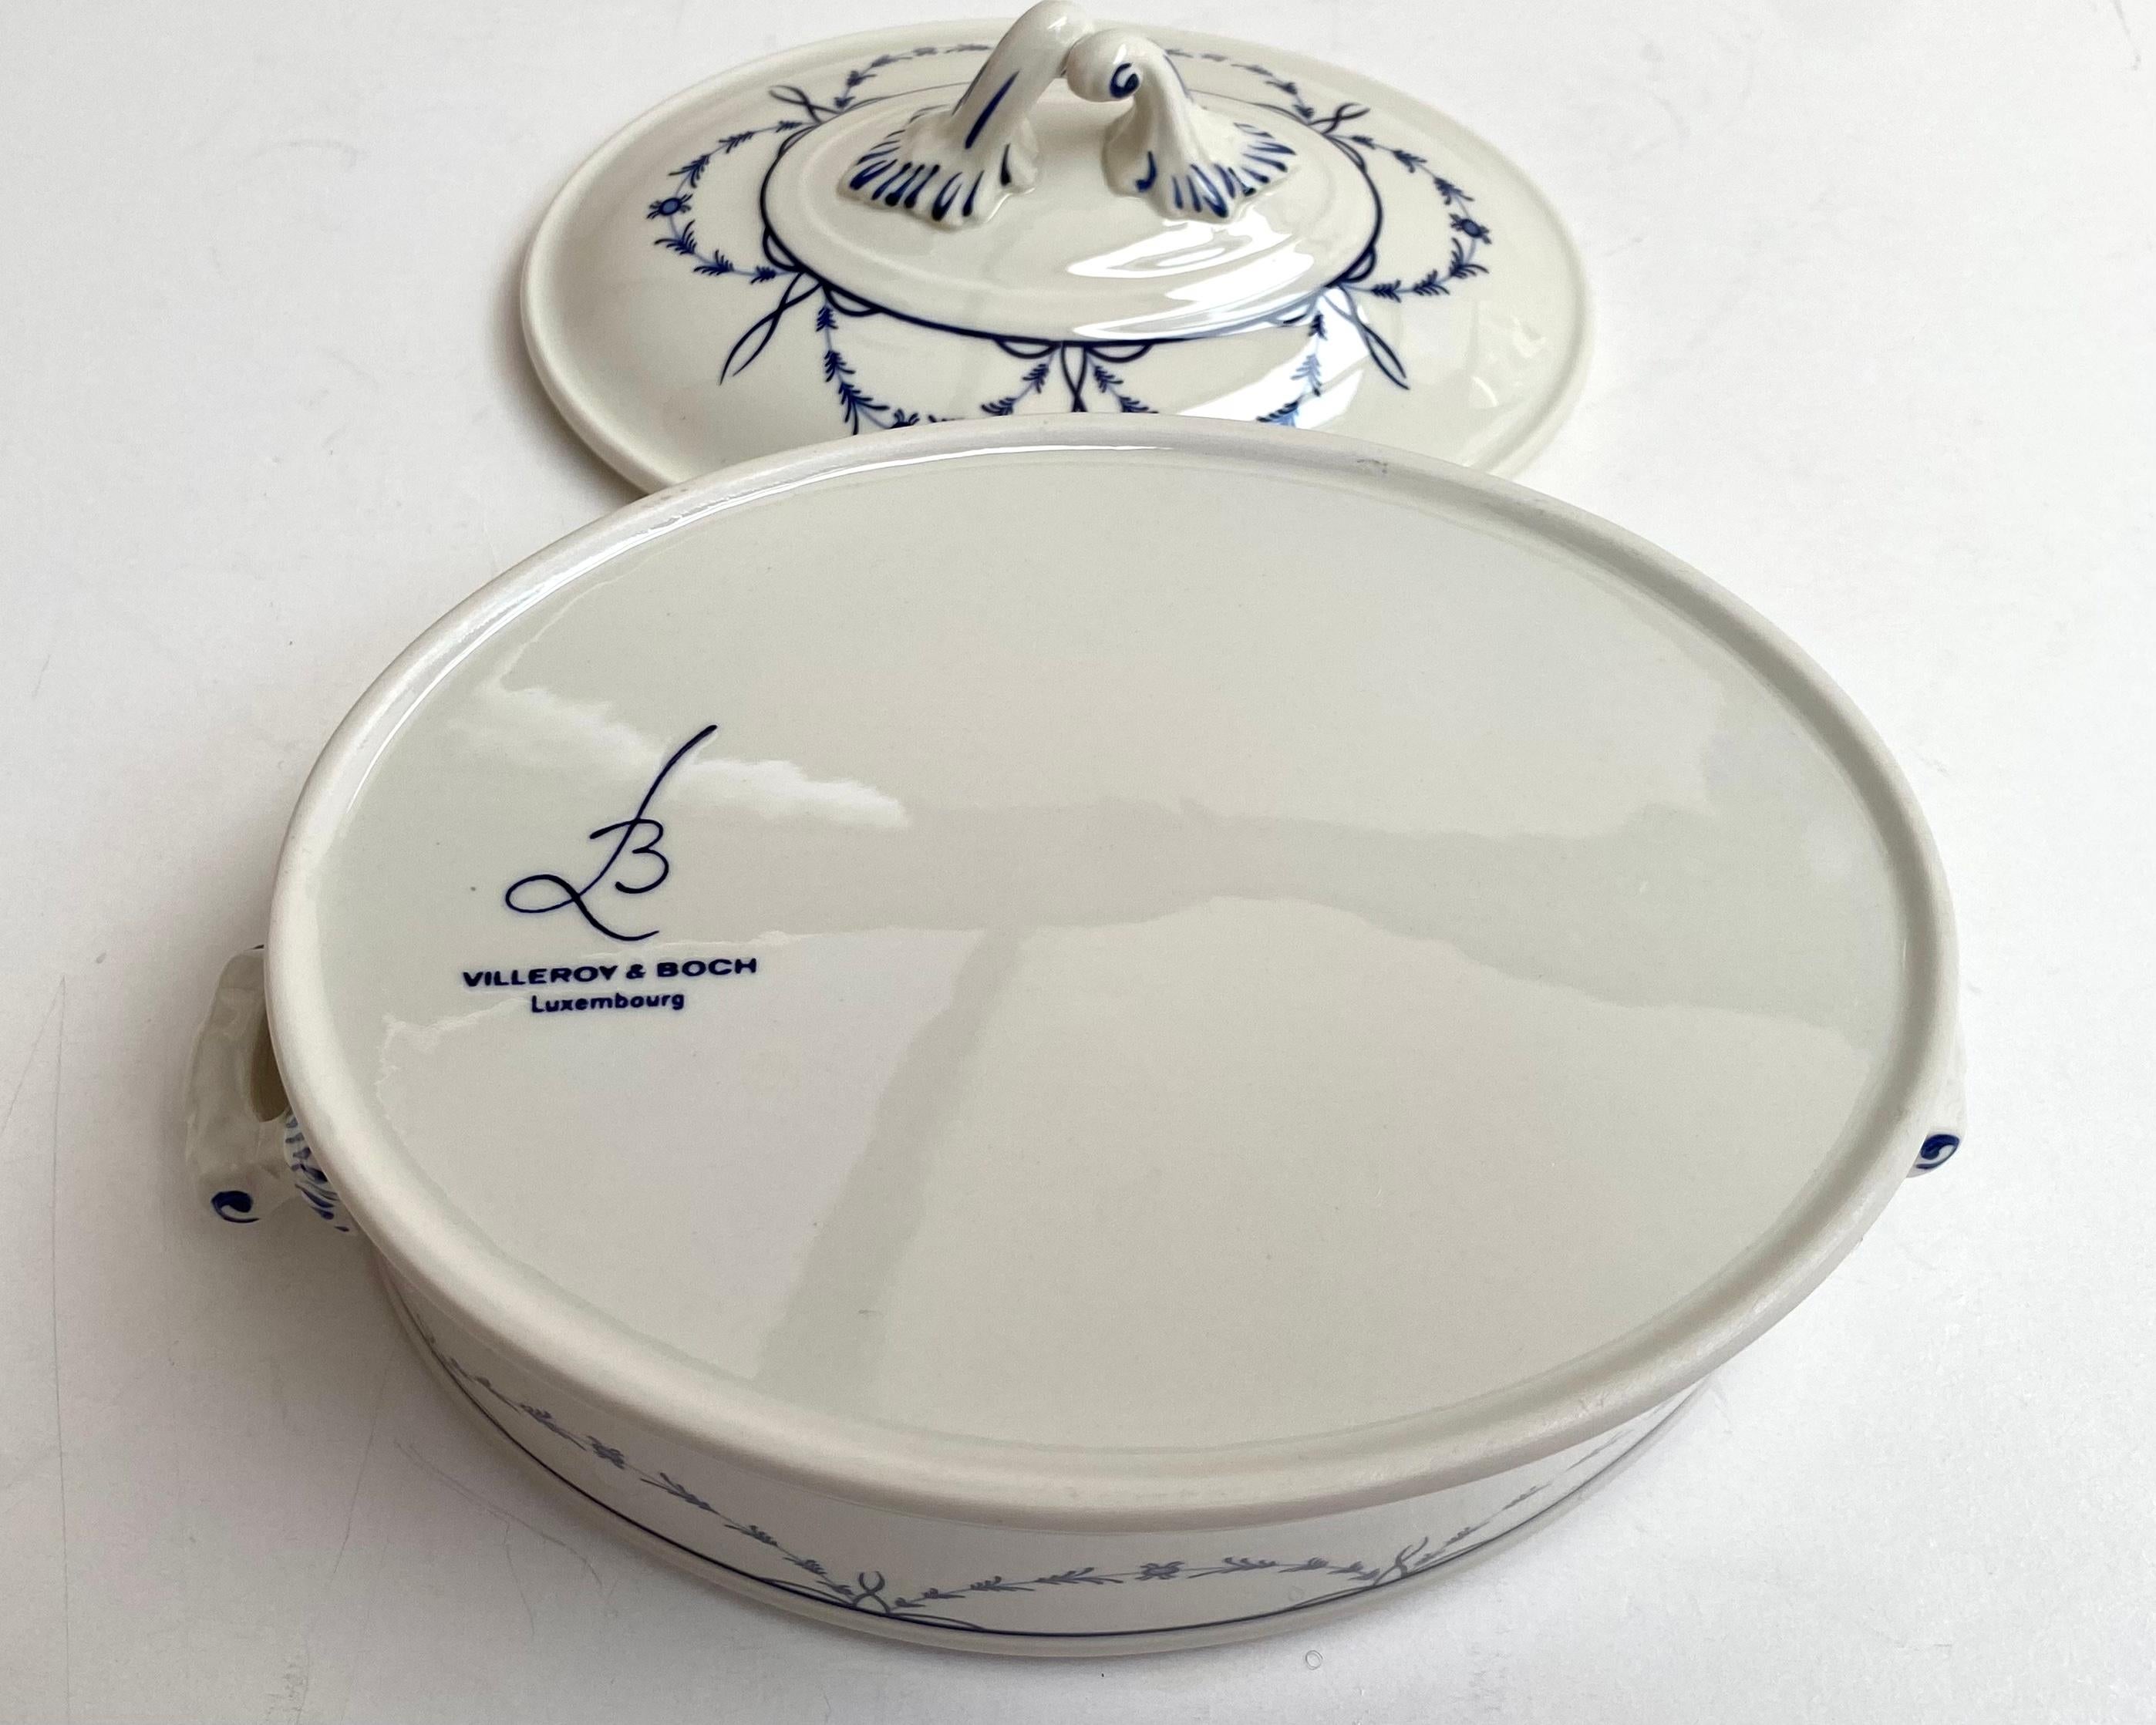 Luxembourgish Miniature Oval Tureen with Lid Vieux Septfontaines Villeroy & Boch, Candy Bowl For Sale